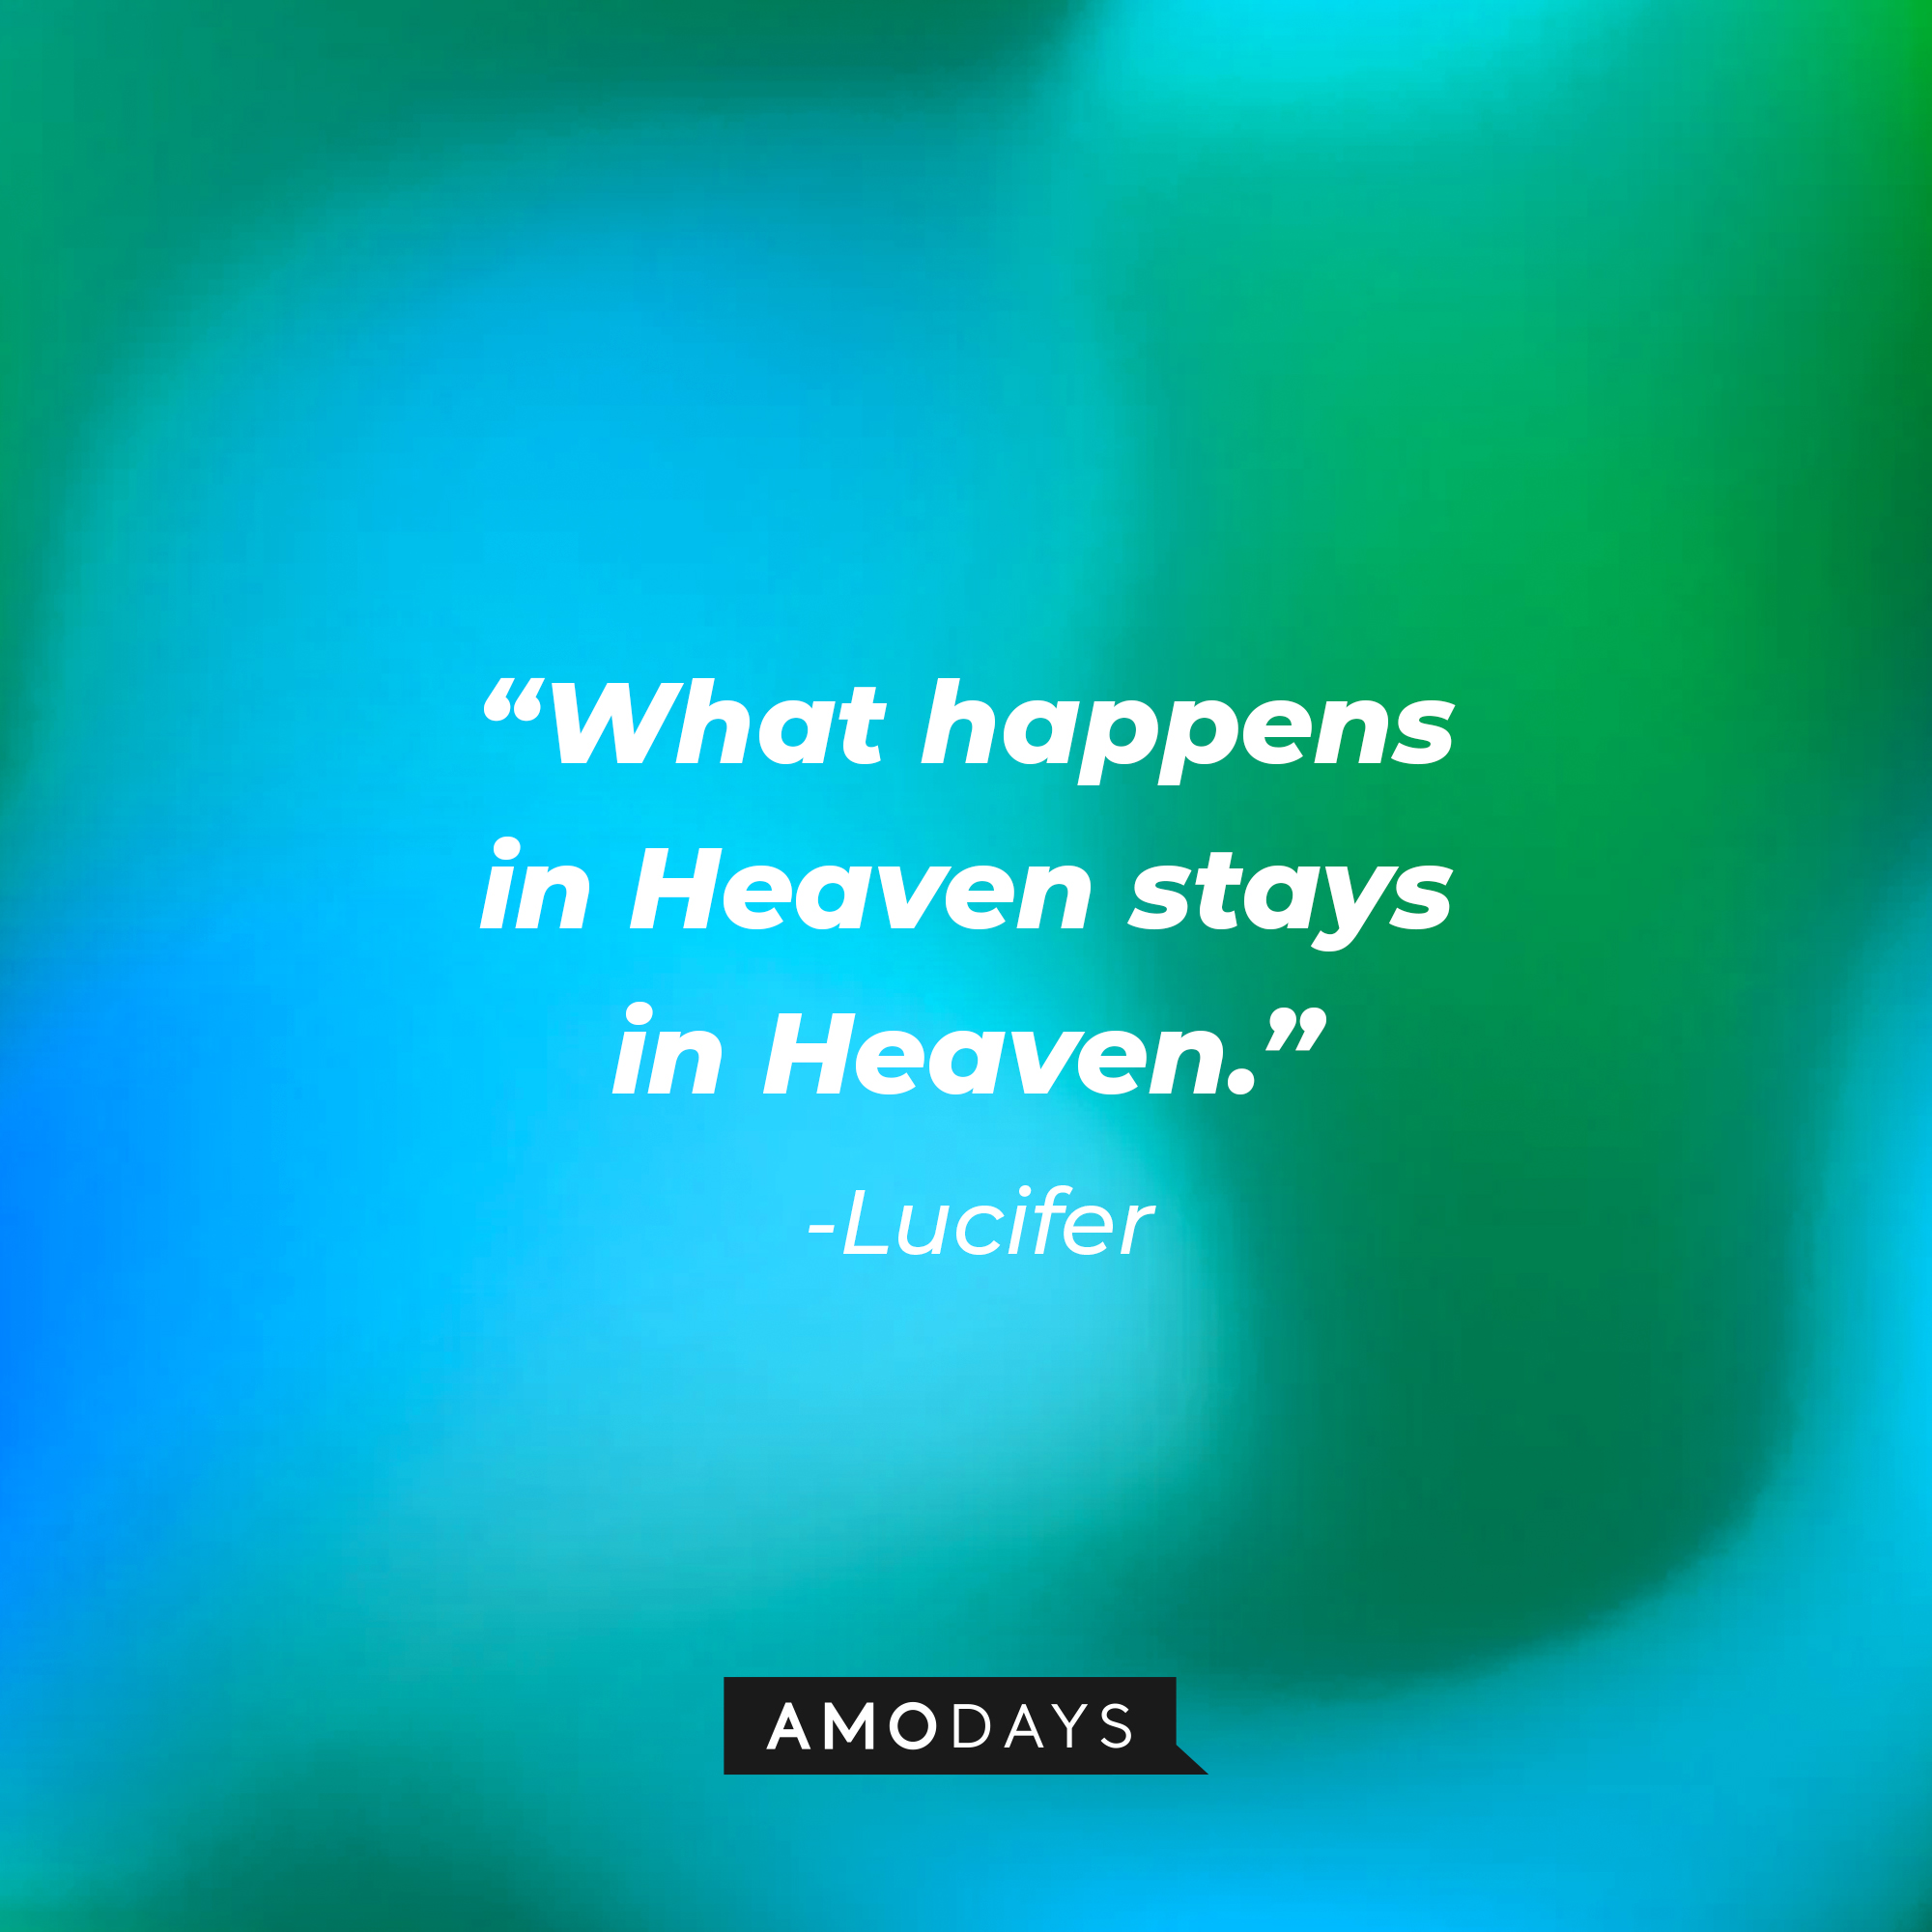 Lucifer’s quote: " What happens in Heaven stays in Heaven." | Source: AmoDays